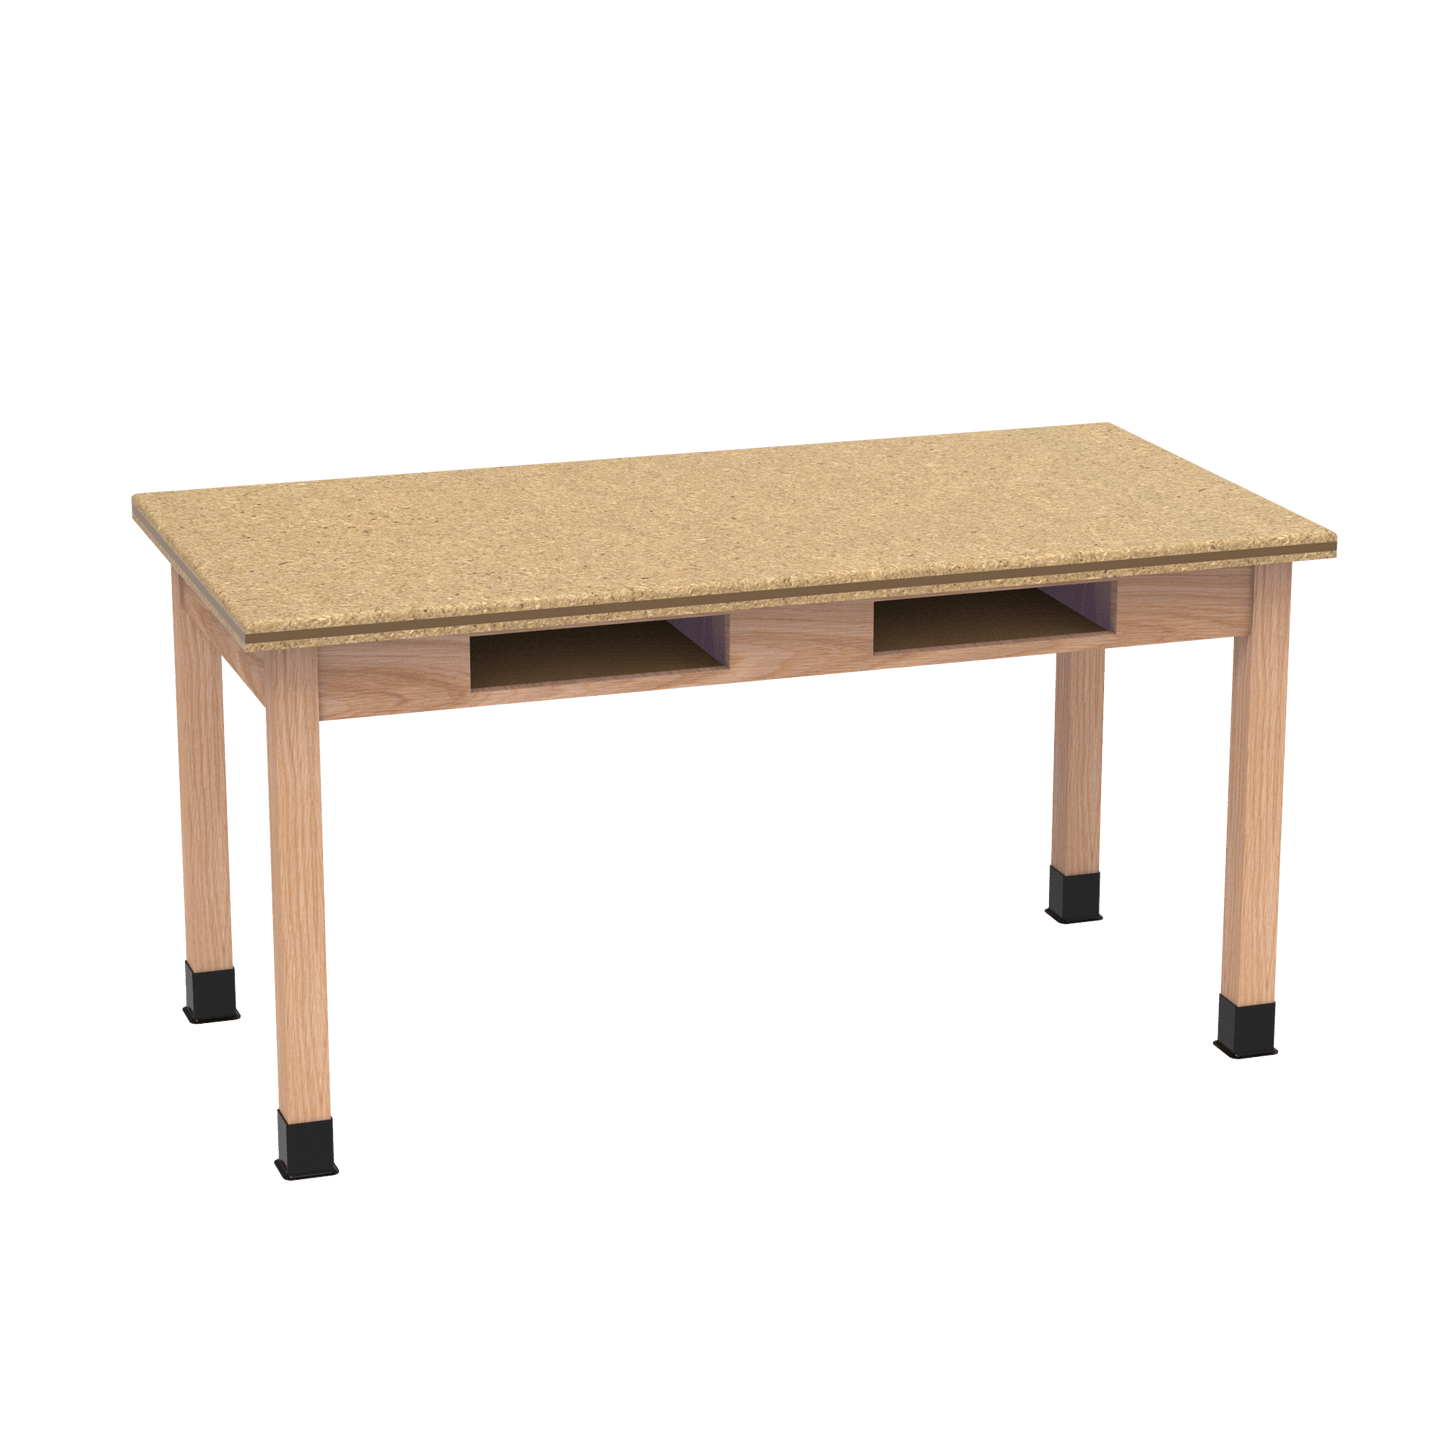 Diversified Woodcrafts Science Table w/ Book Compartment - 54" W x 21" D - Solid Oak Frame and Adjustable Glides - SchoolOutlet